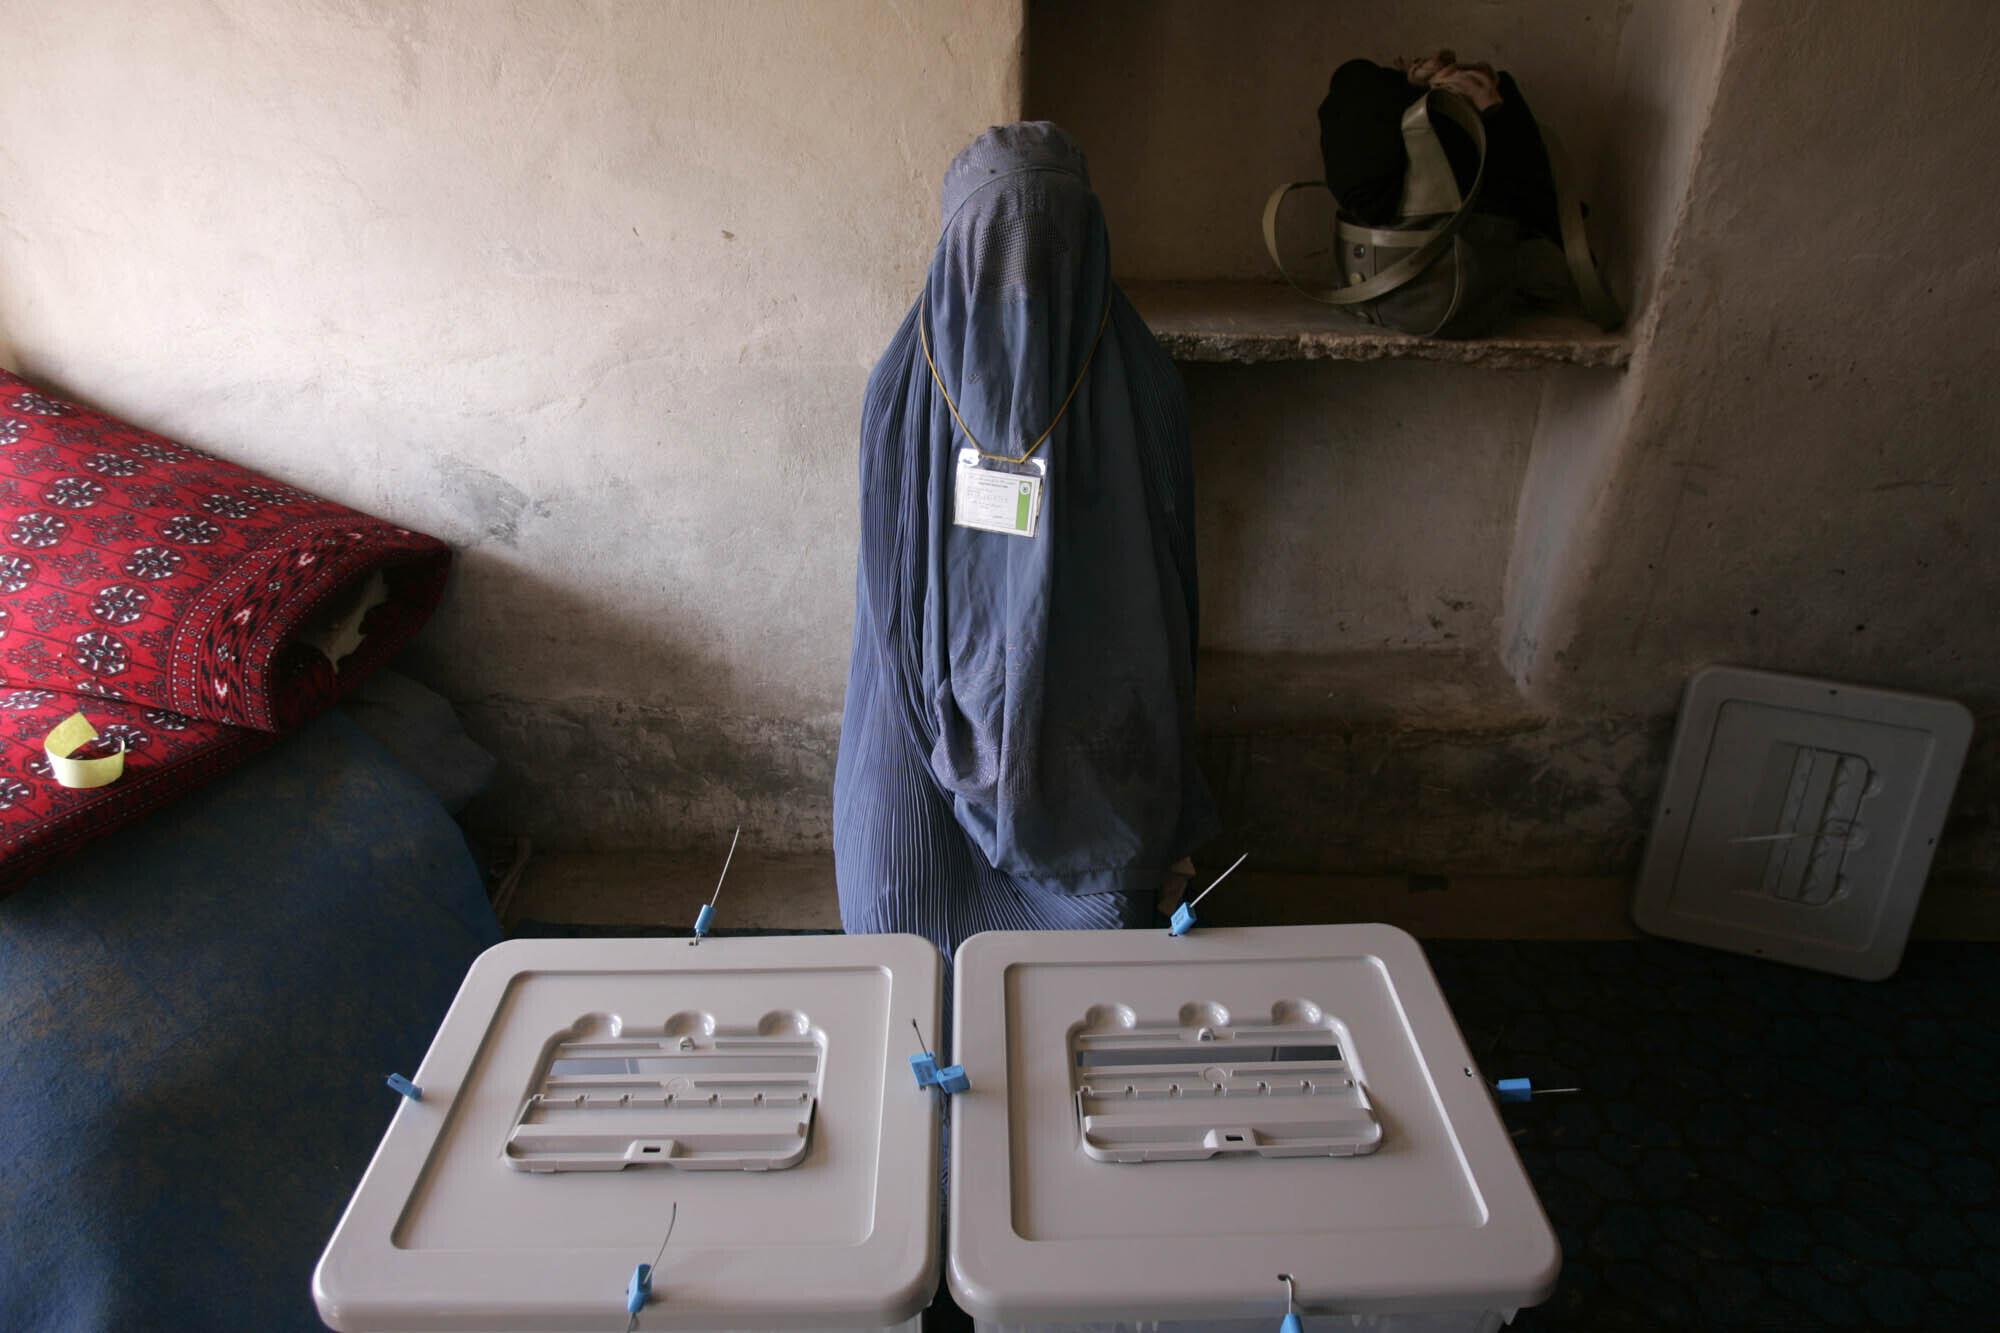 A woman poll worker waits for voters to arrive at a polling station in Kandahar, Afghanistan, Sept. 18, 2005. Afghanistan held landmark parliamentary elections, the first in three decades. (AP Photo/Saurabh Das)